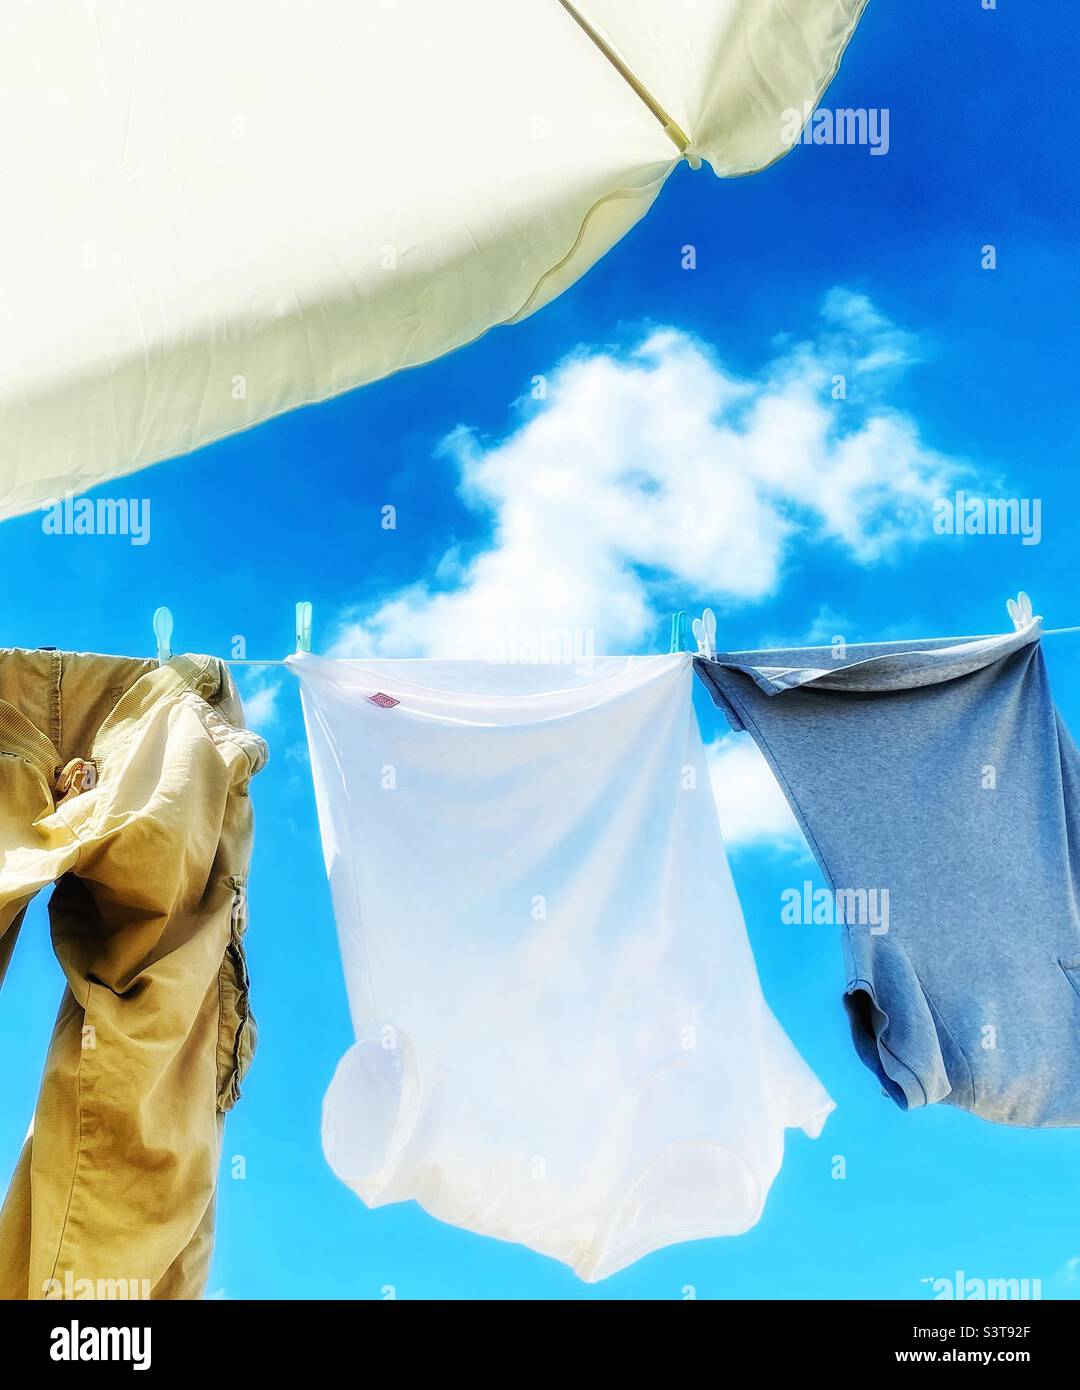 Clothes drying on the washing line Stock Photo